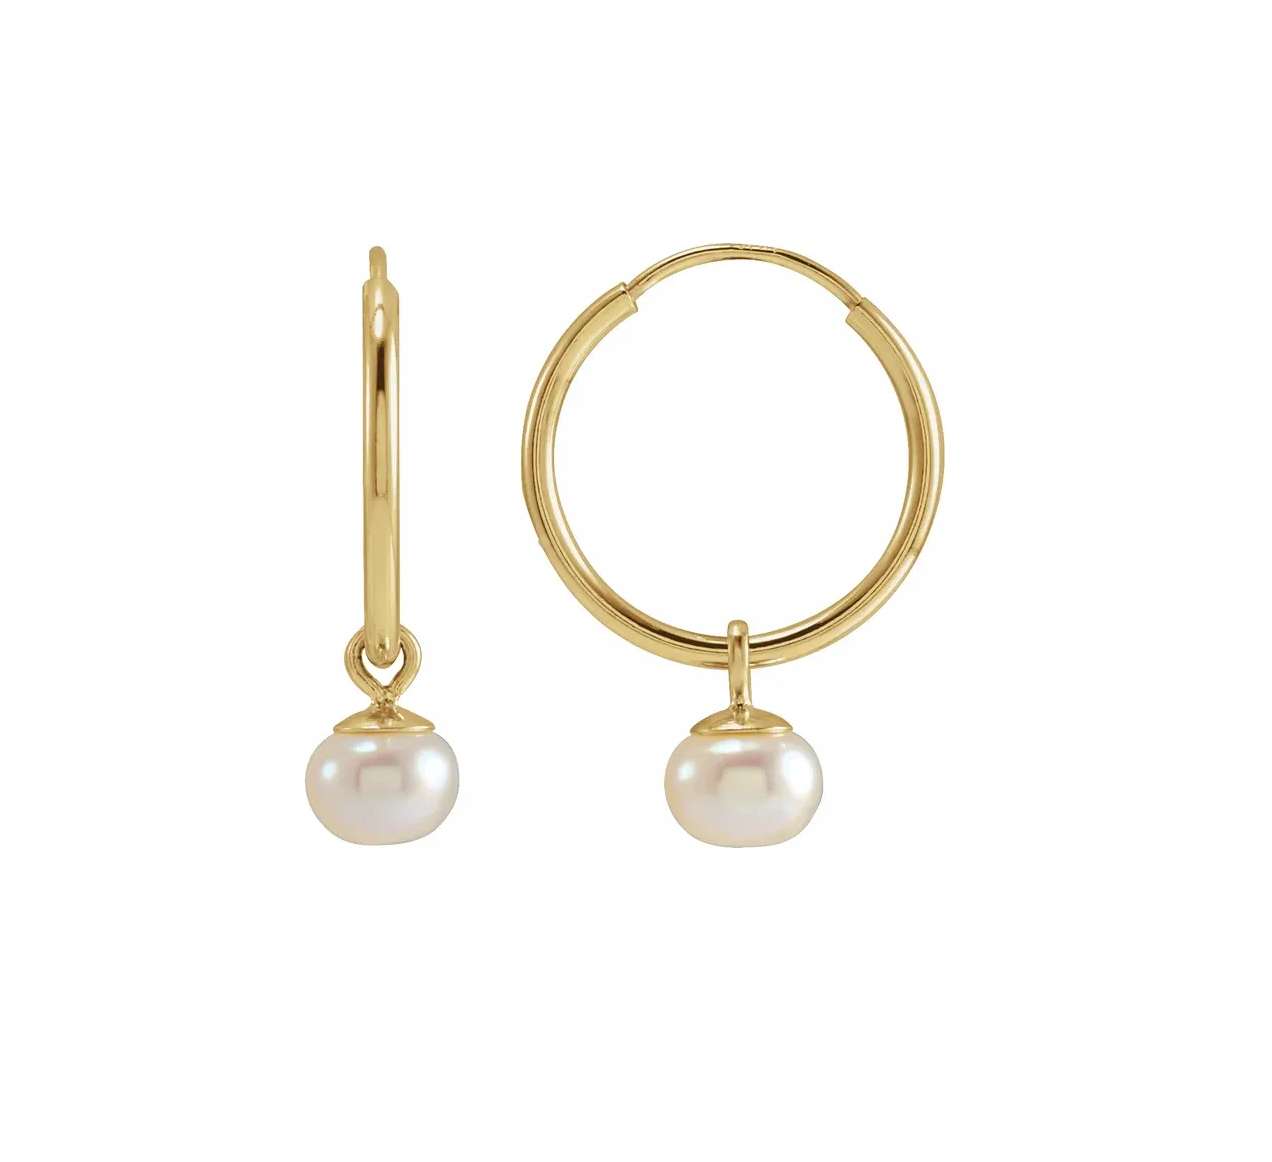 Geo Rivet Earrings with Montana Sapphires - 3.5 - Sterling Silver & 14k  Yellow Gold